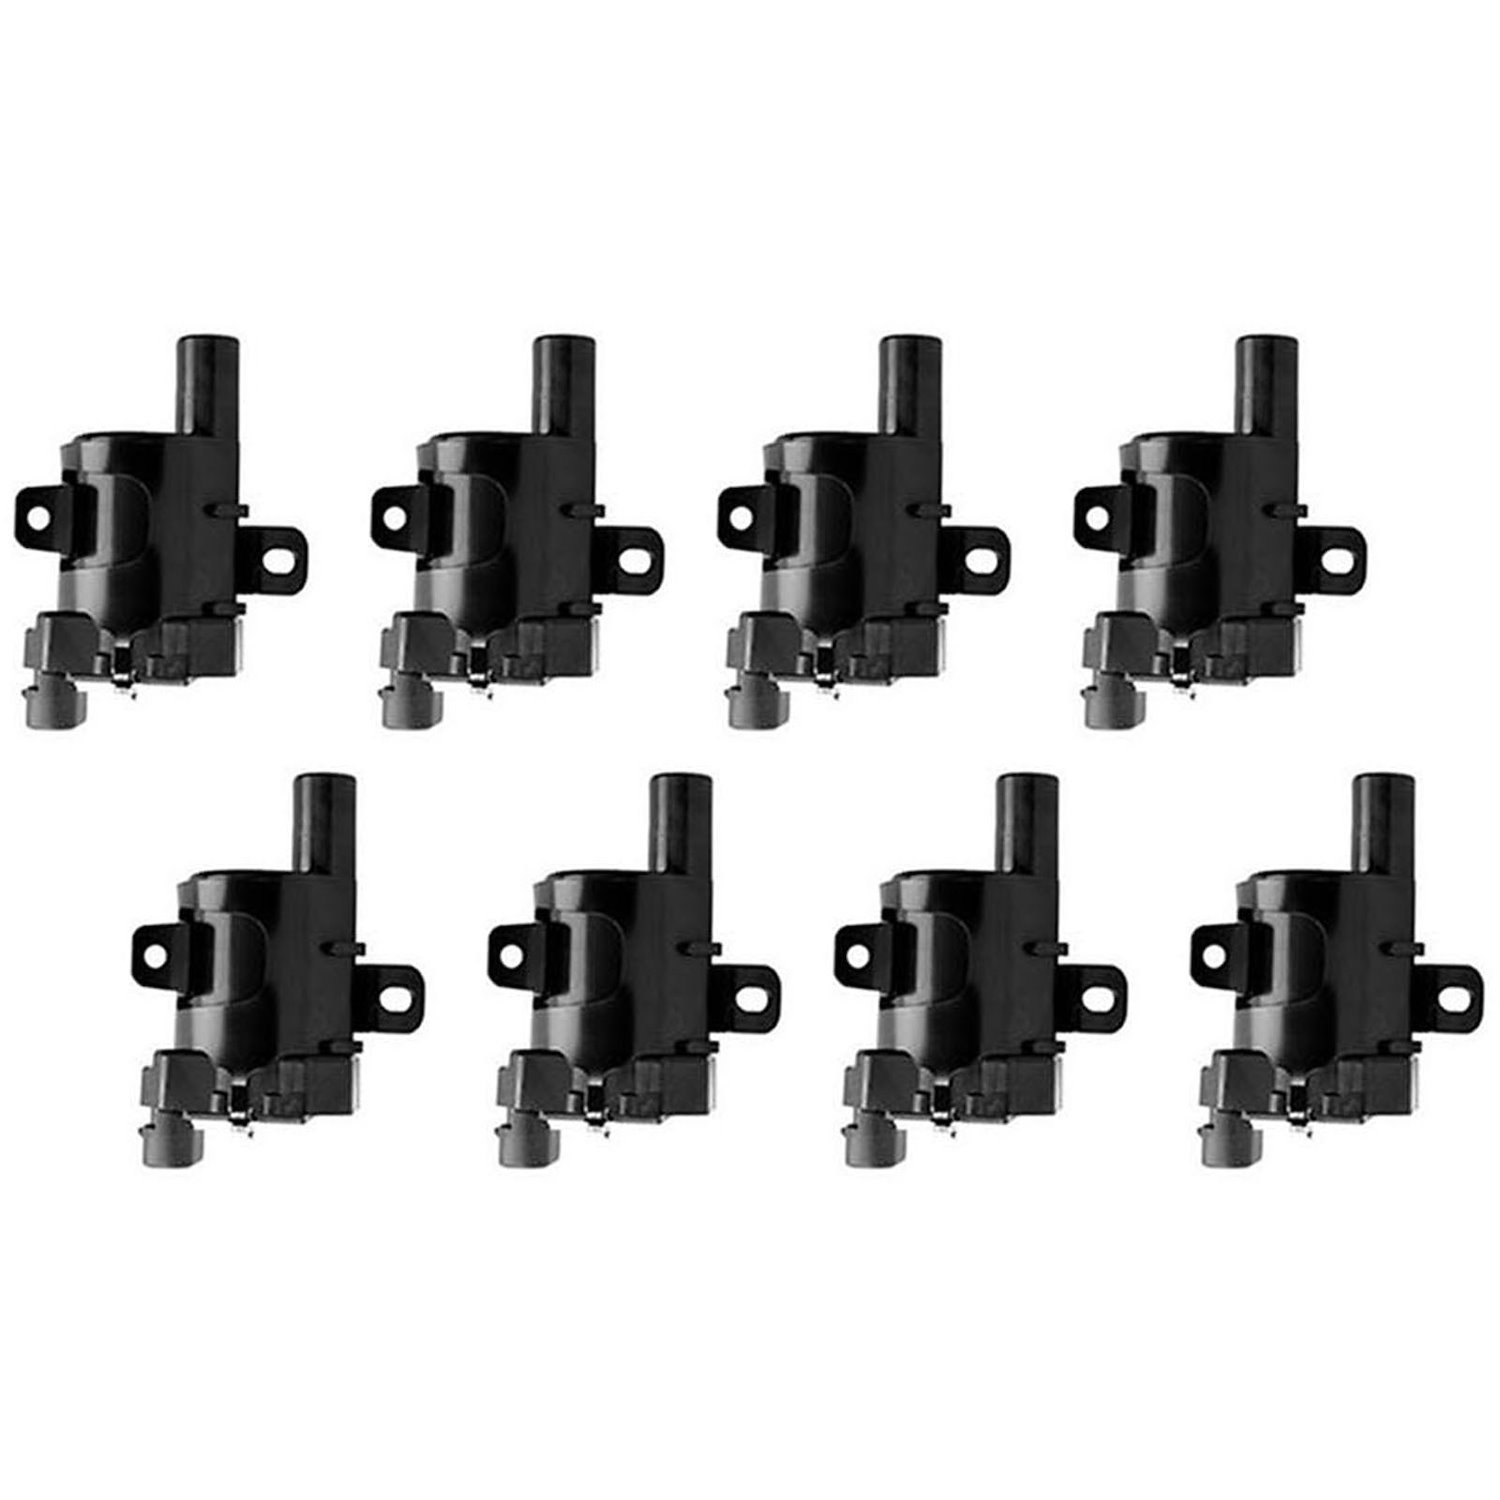 OE Replacement Ignition Coils for GM Sierra/Yukon 4.8L/5.3L/6.0L